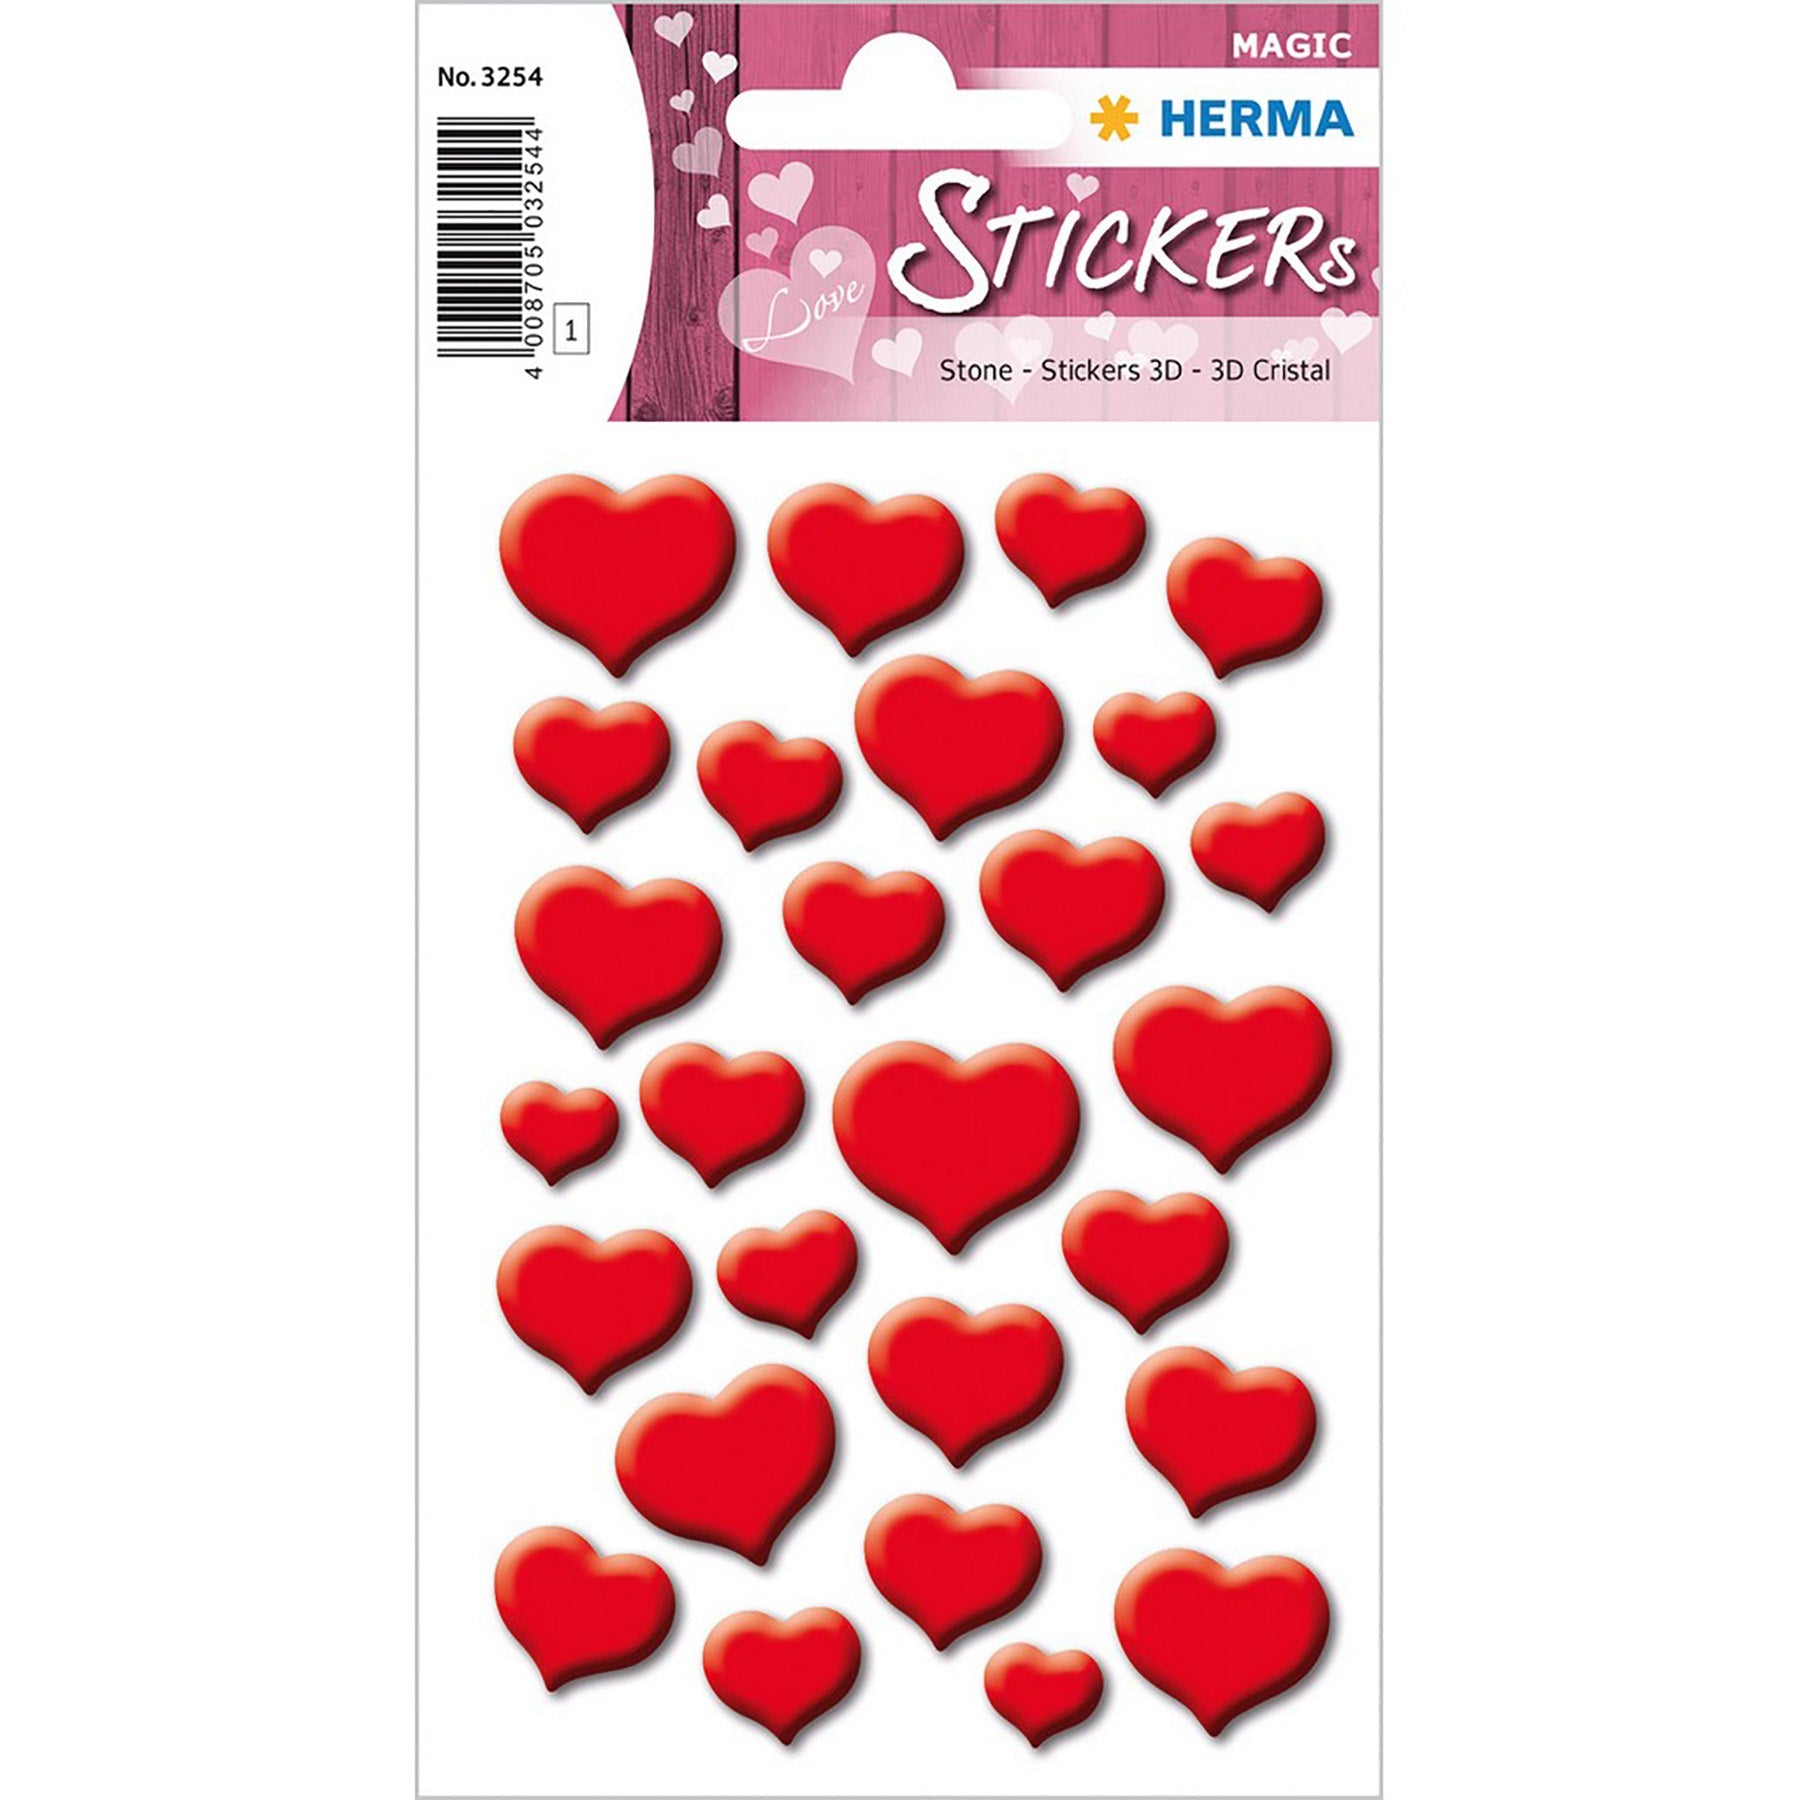 Herma Magic Stickers Red Hearts 3D Crystal 4.75x3.1in Sheet